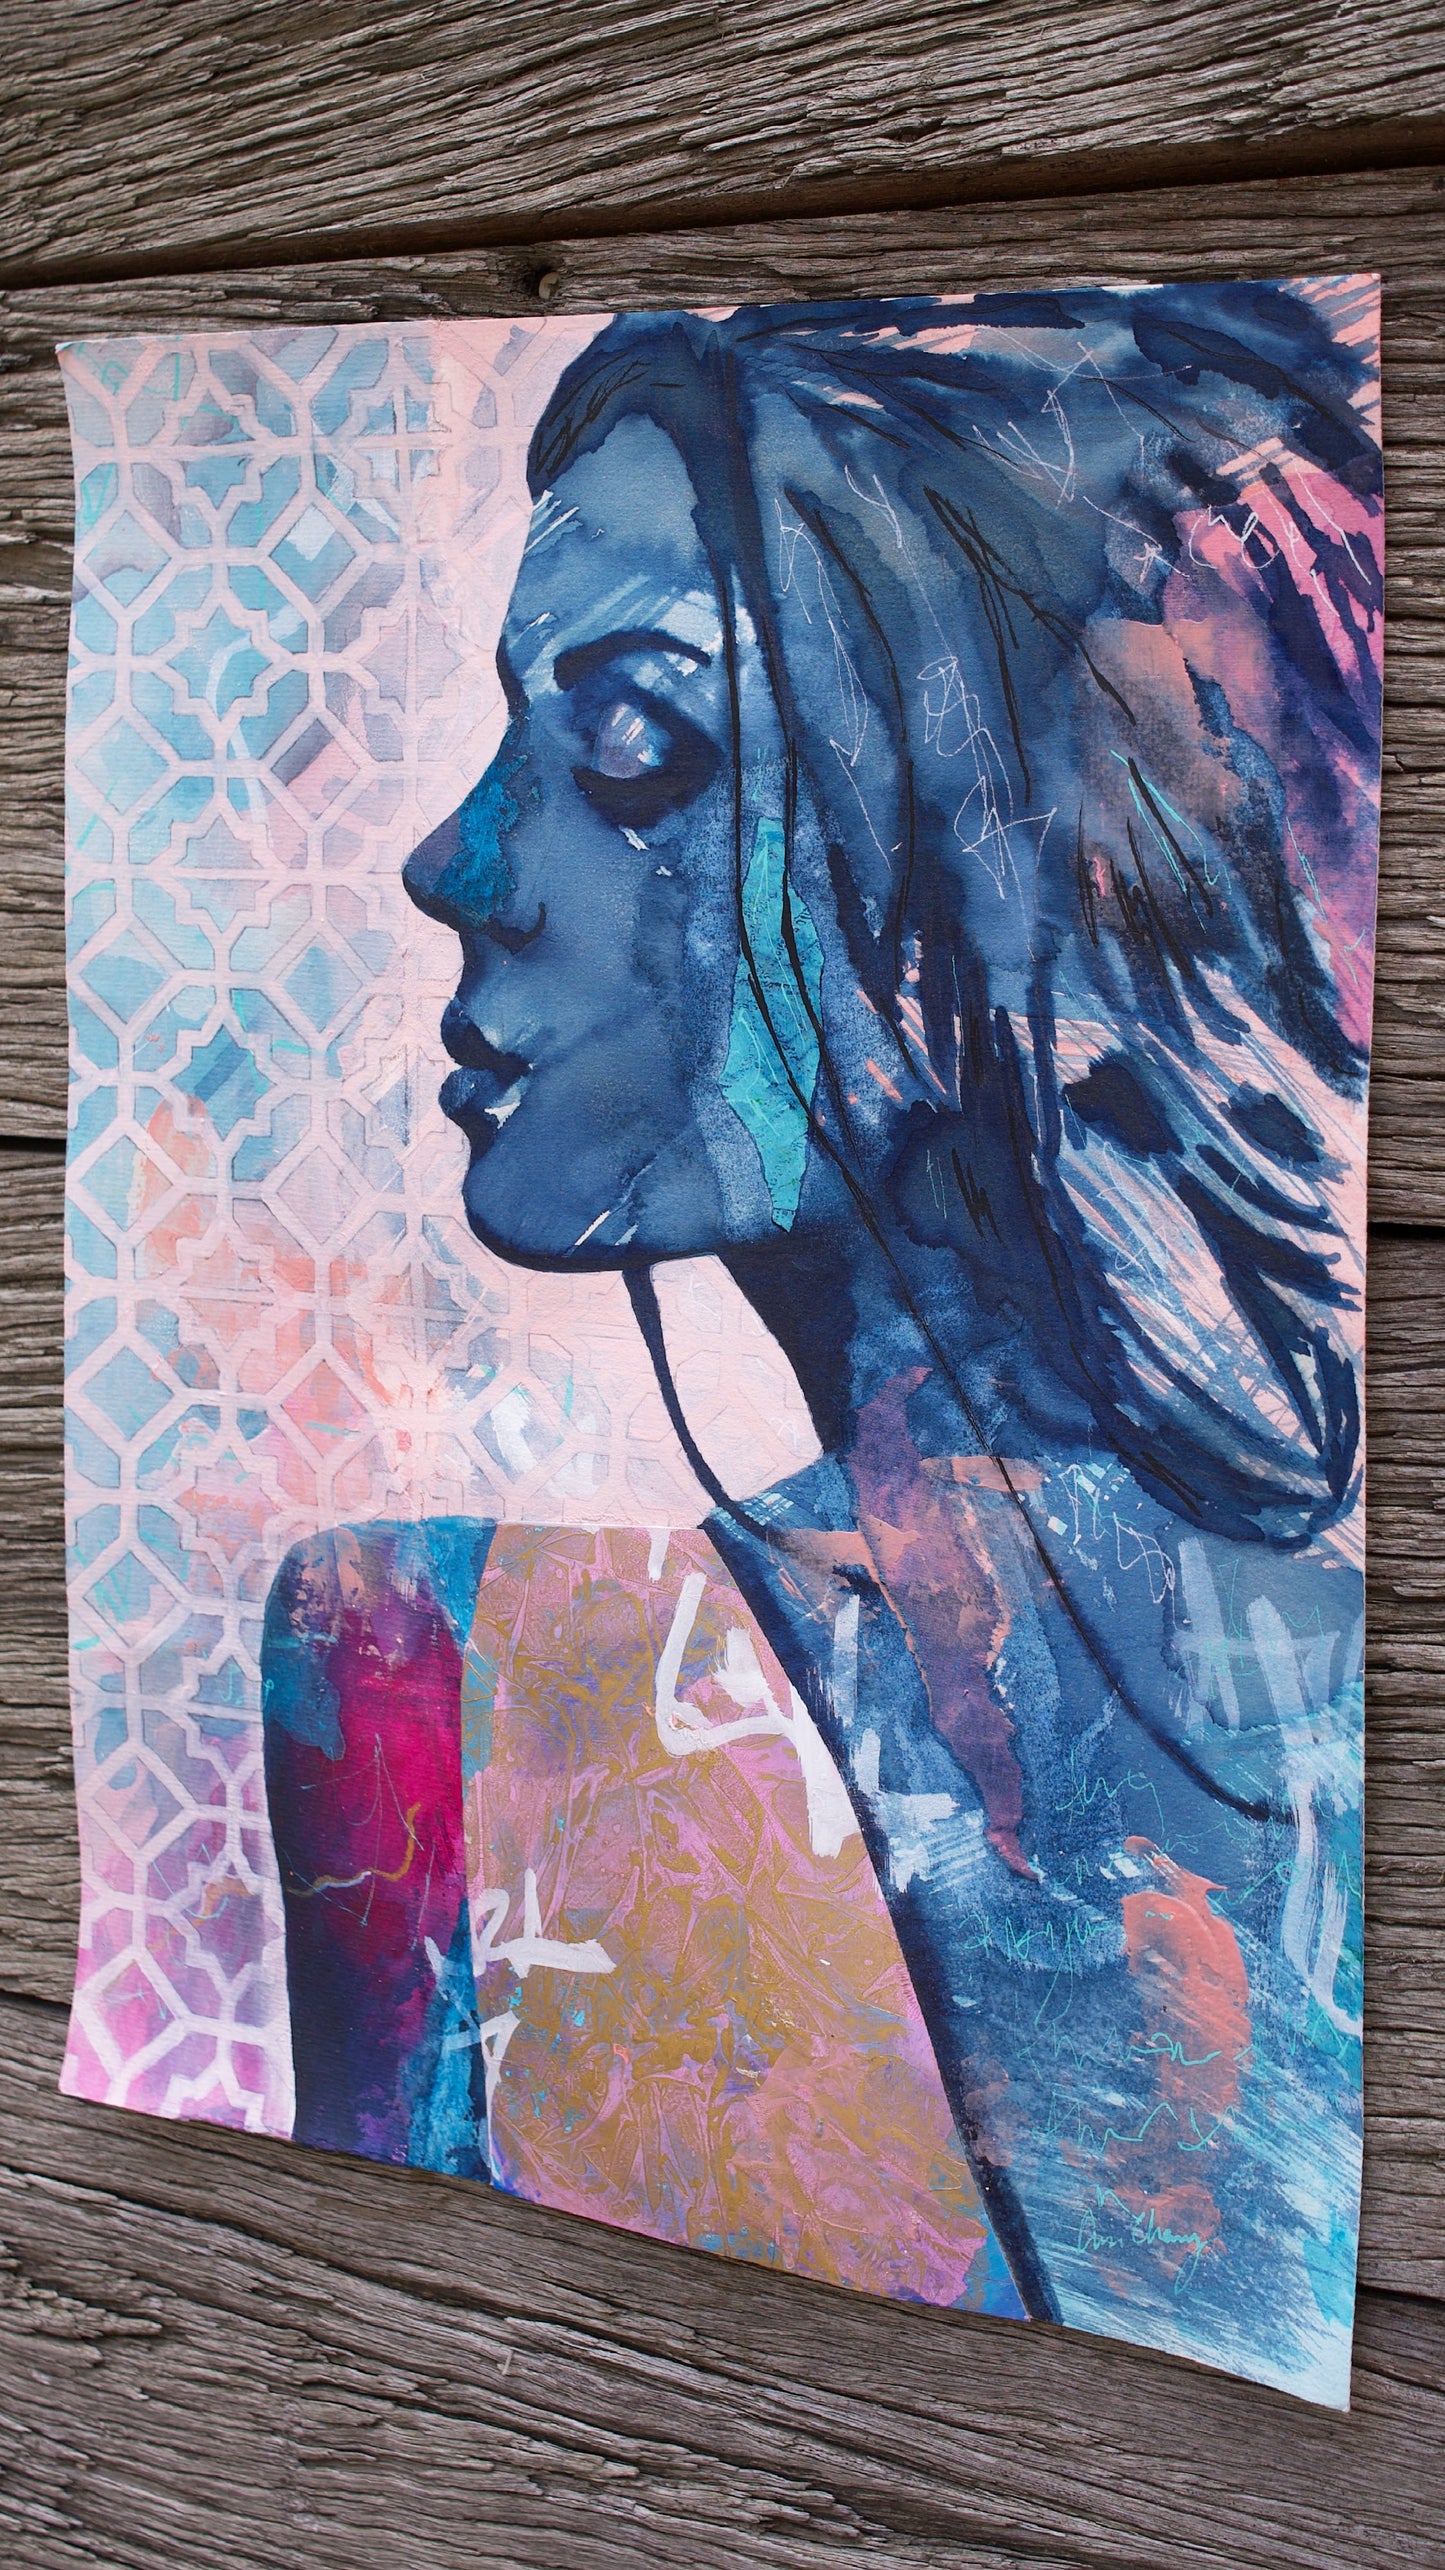 abstract art portait of a Woman on A3 Paper Blue & Pink Stencil Art Street Art paintings melbourne